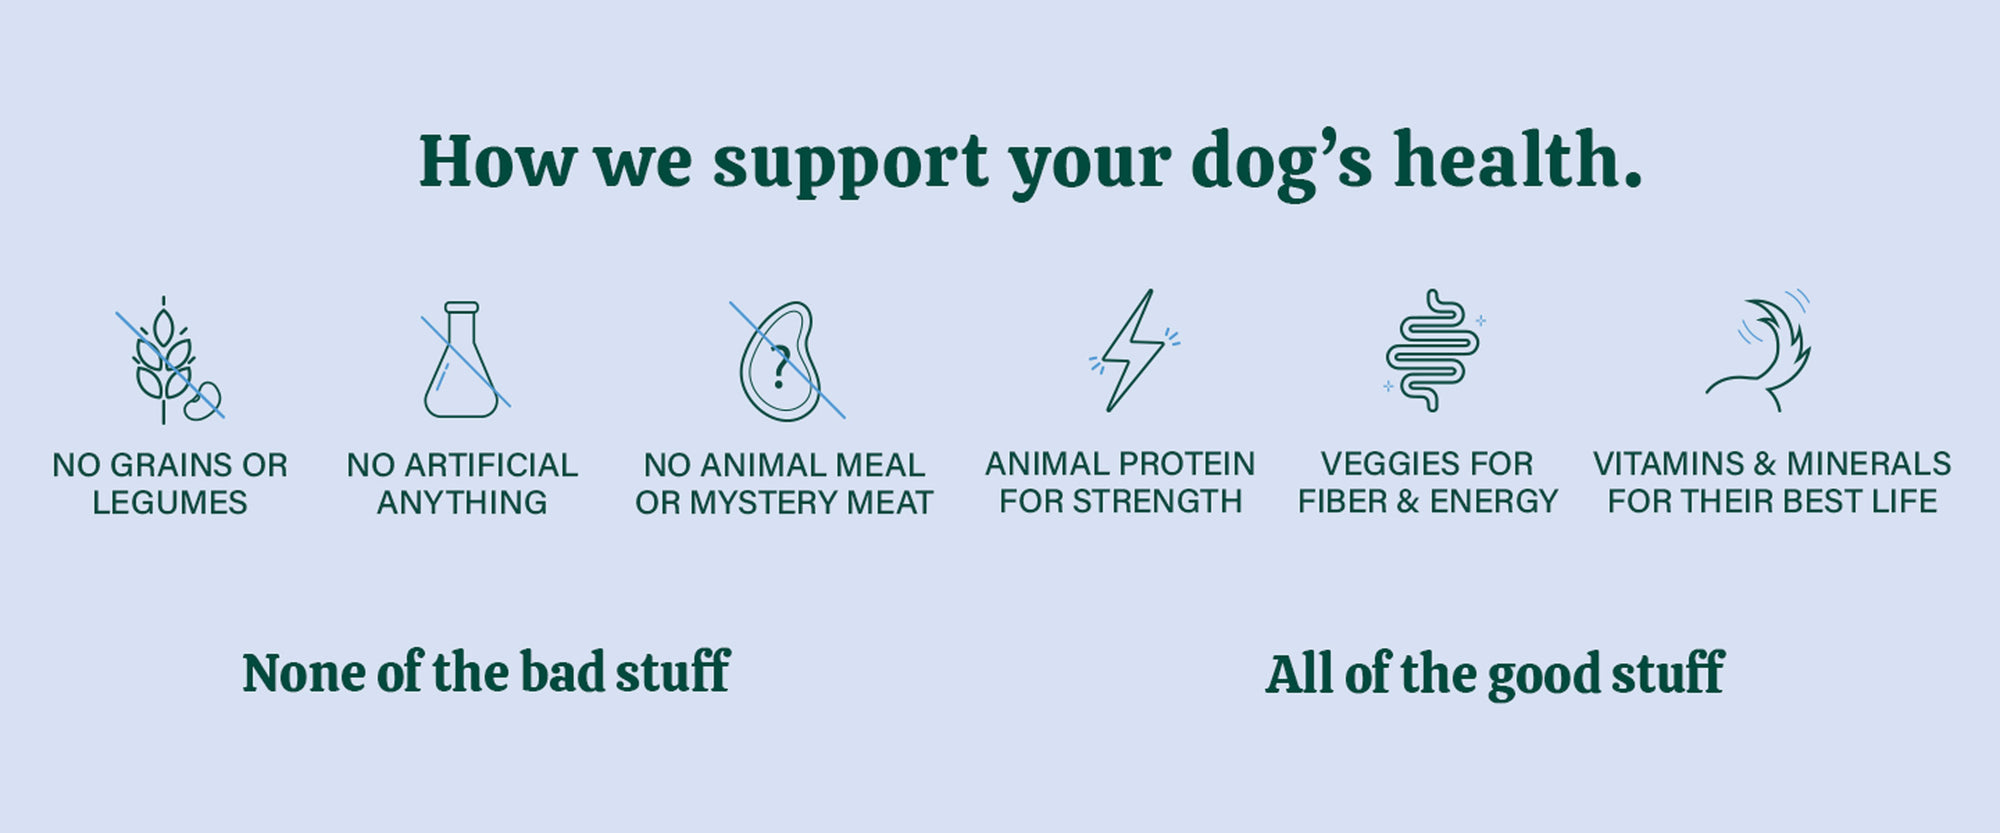 The Conscious Pet products do not include legumes, grains, artificial ingredients, animal meal, byproducts or mystery meat. 